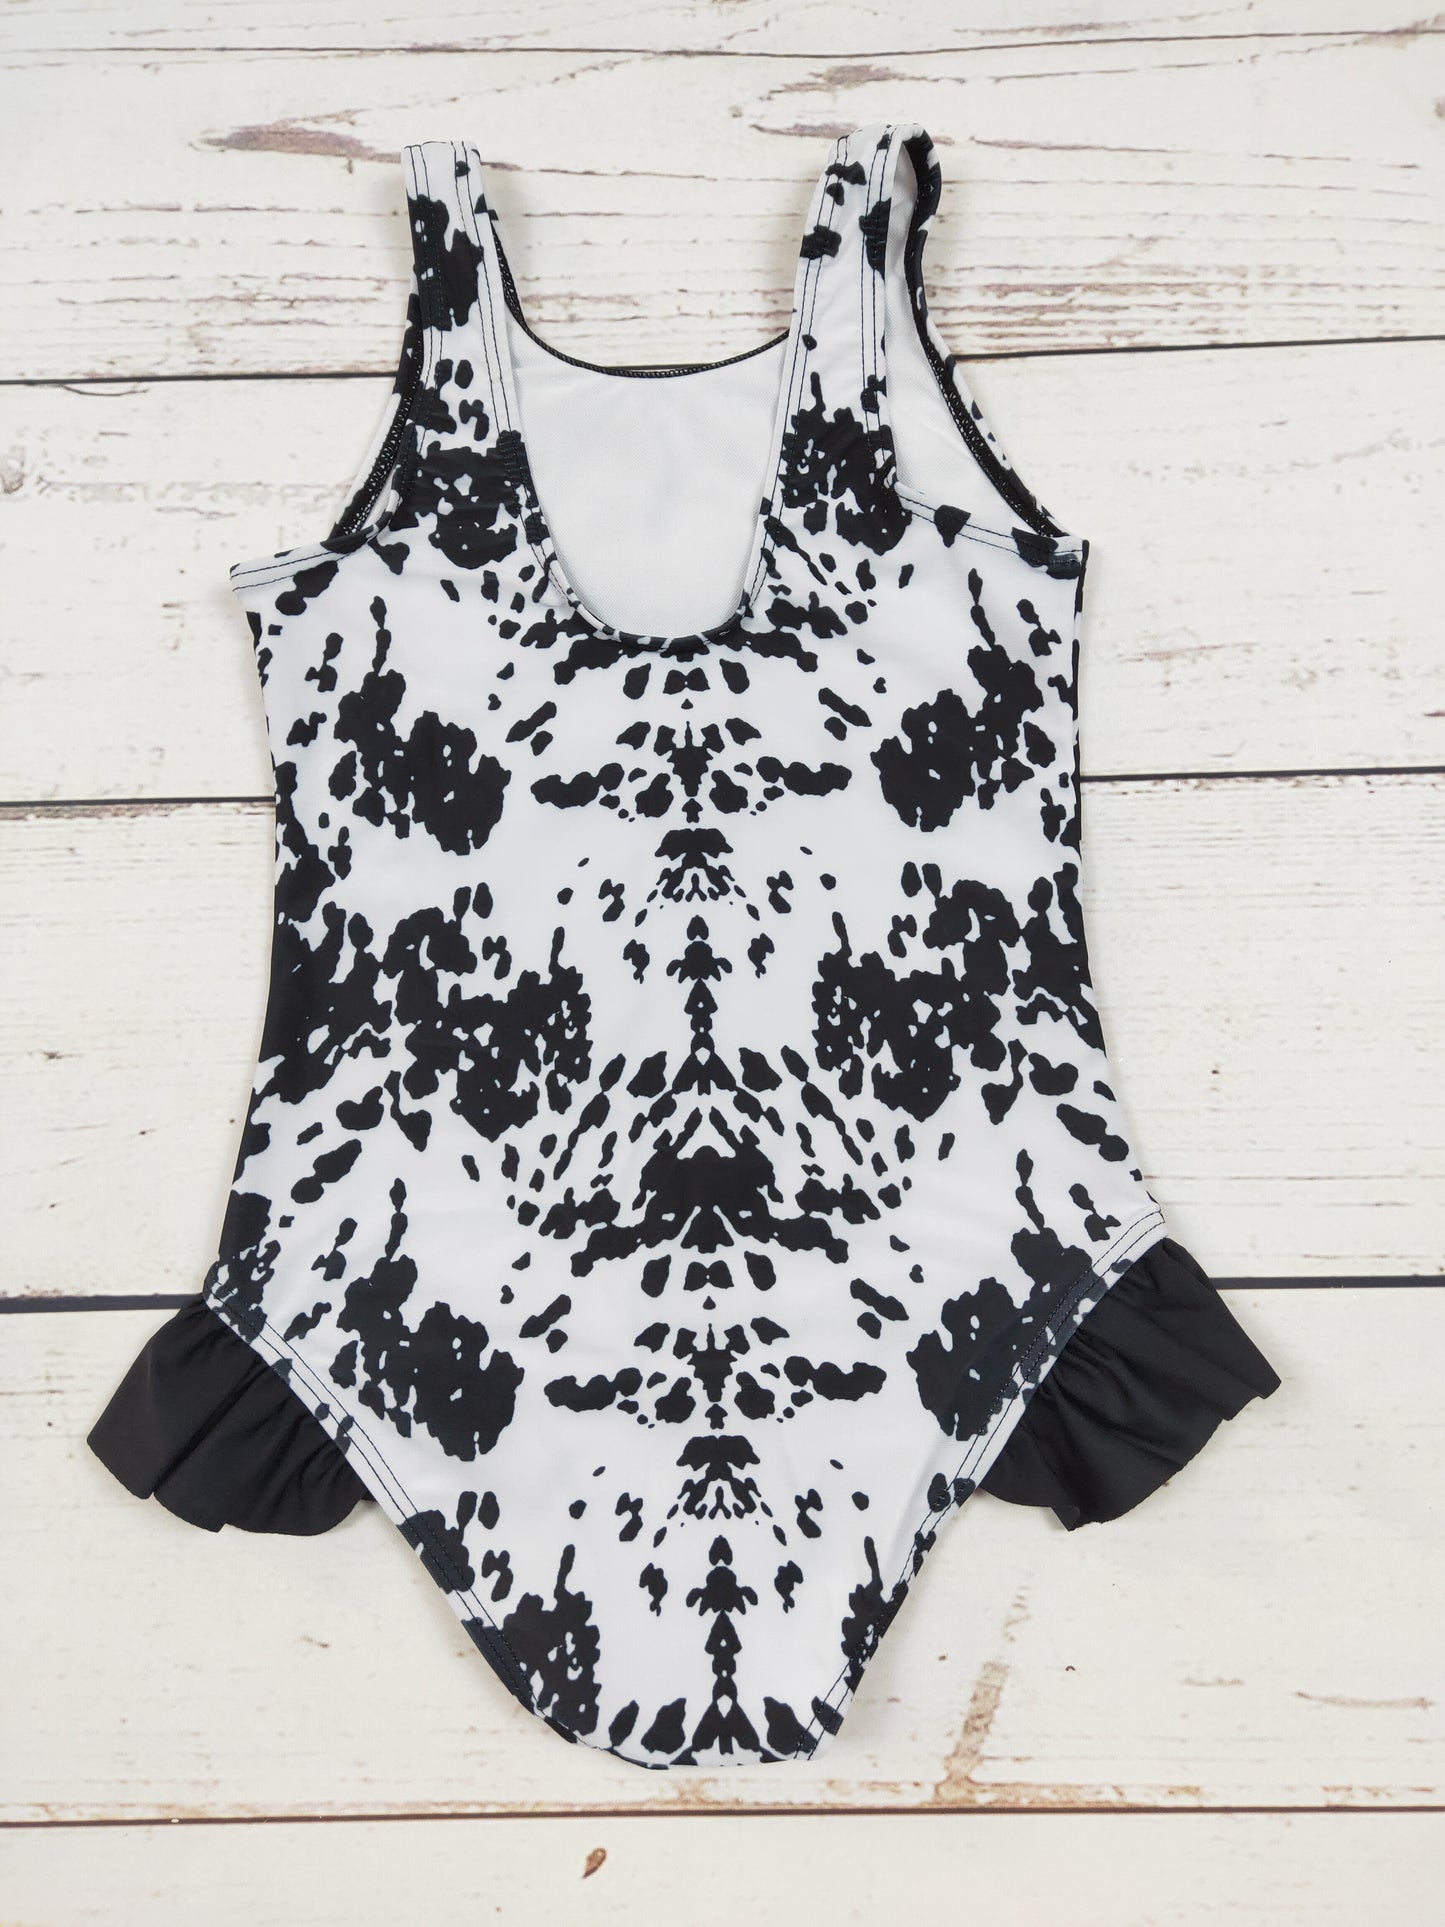 Black White Cow Printed One Piece Girls Summer Swimsuit